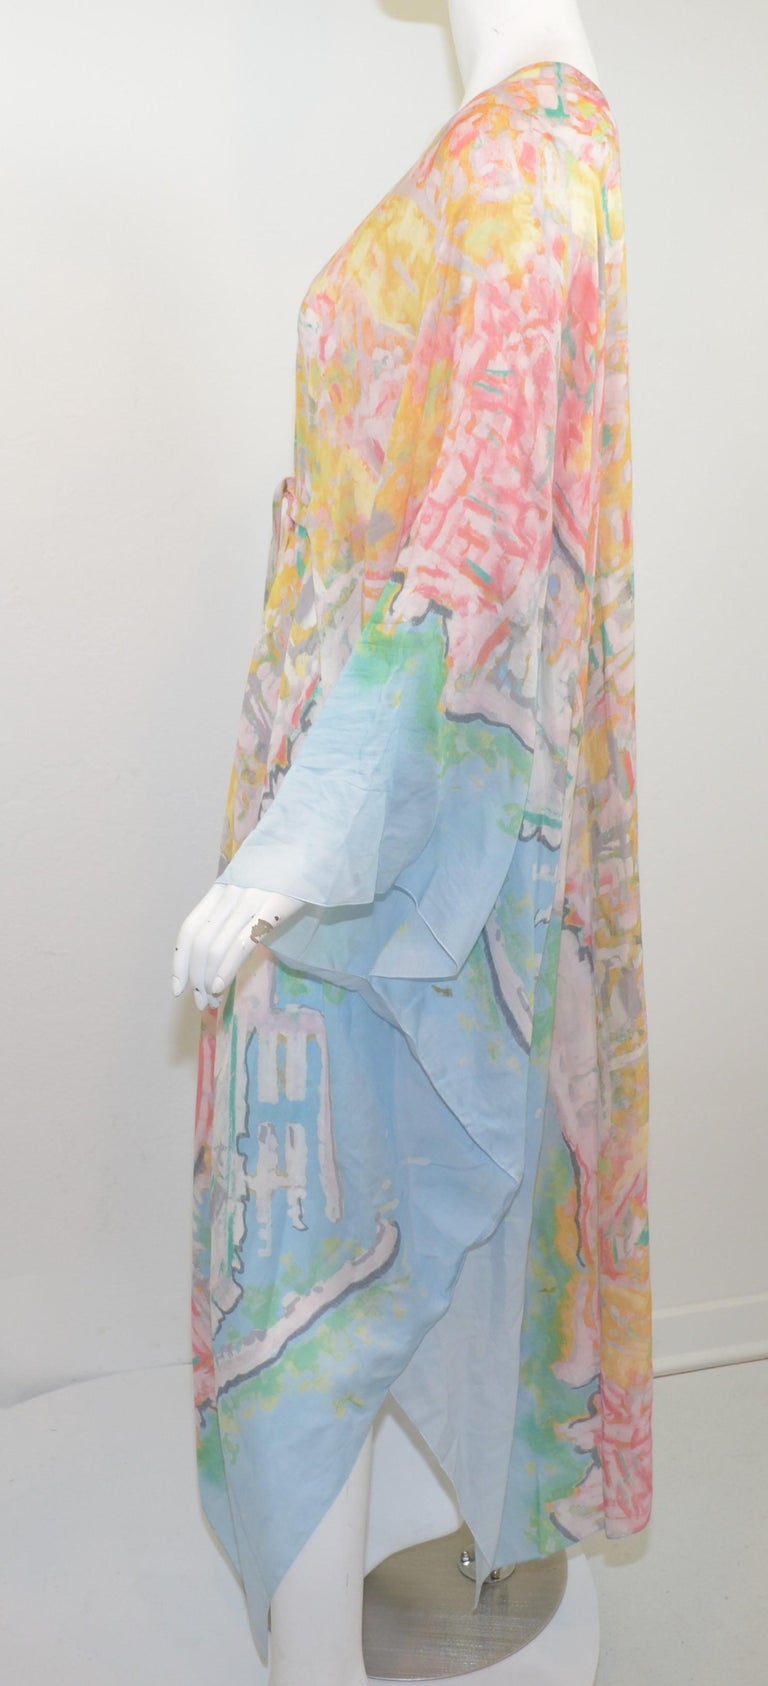 Chanel Silk Blend Watercolor Caftan Maxi Dress In Excellent Condition For Sale In Carmel by the Sea, CA